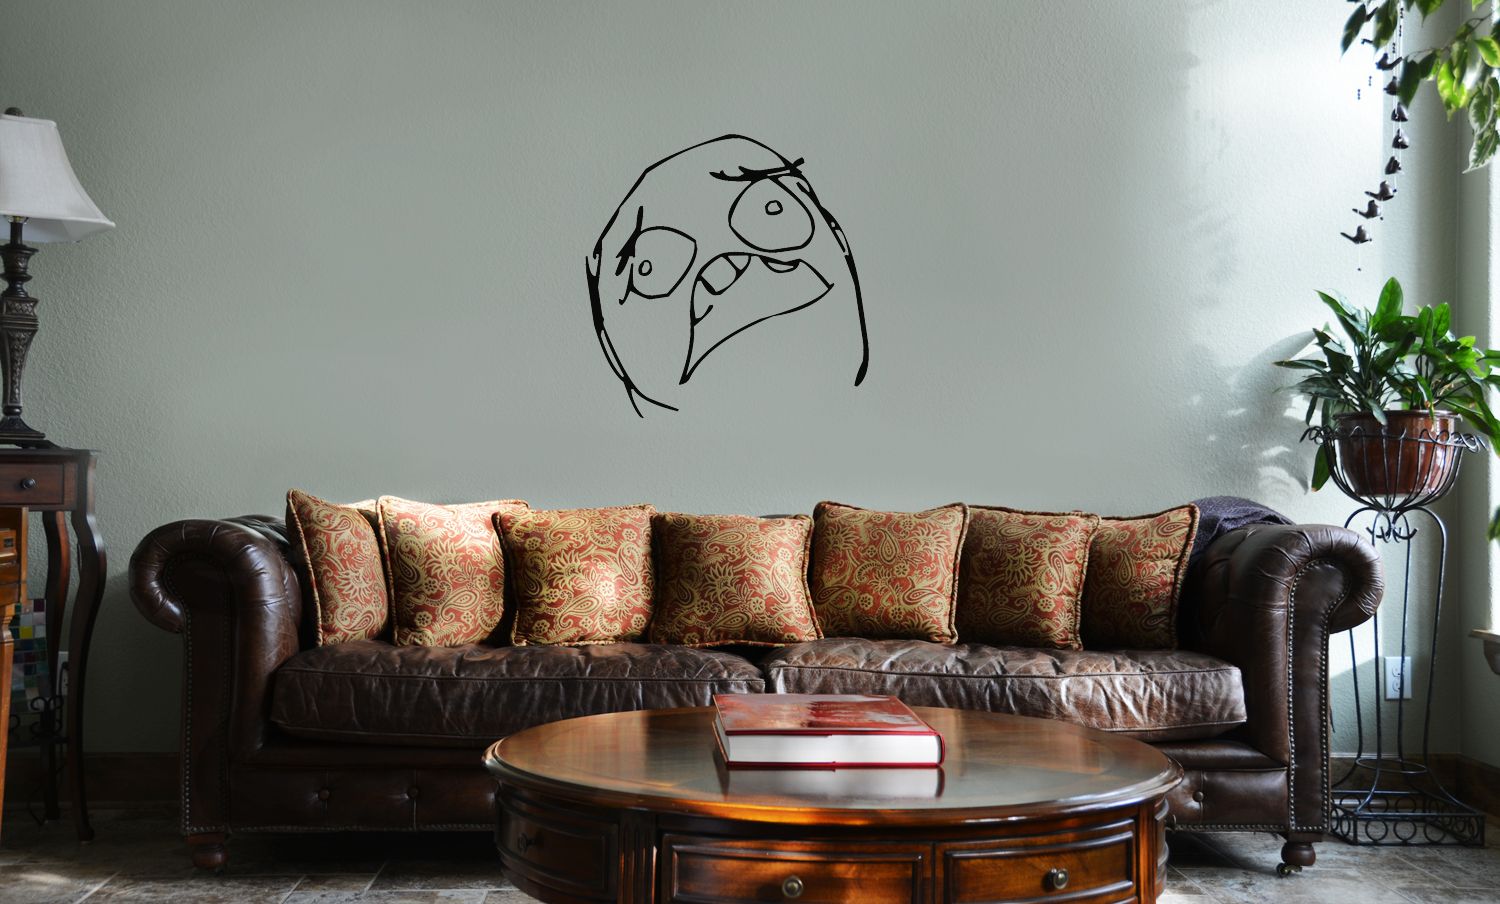 Scared Funny Meme Face Vinyl Wall Mural Decal Home Decor Sticker Regarding Most Up To Date Fun Wall Art (View 20 of 20)